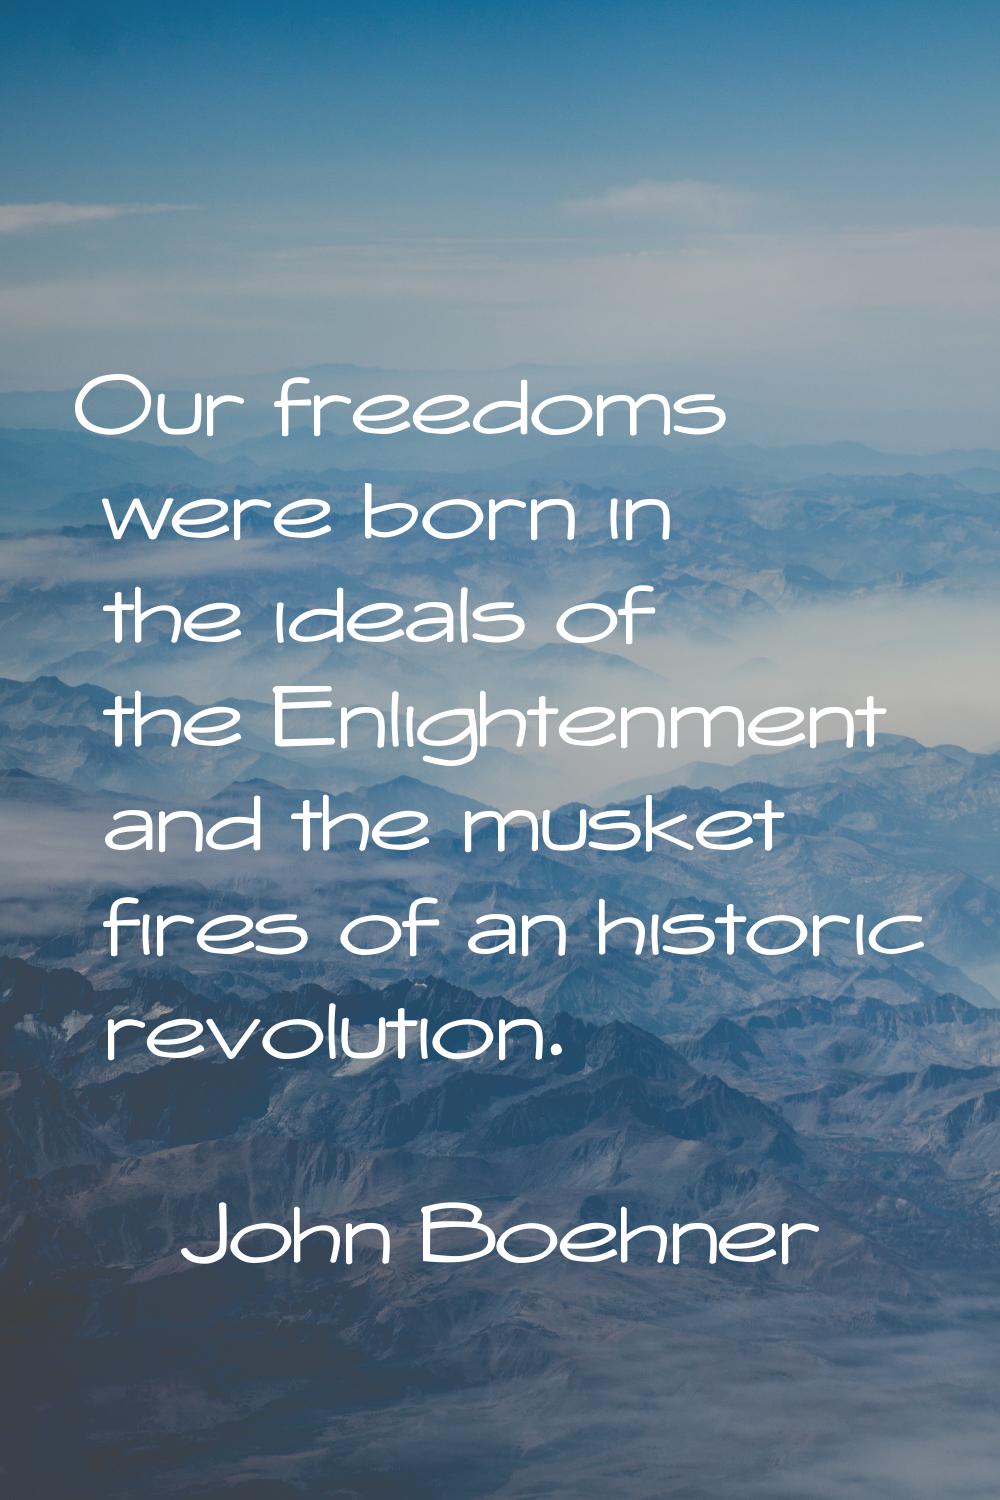 Our freedoms were born in the ideals of the Enlightenment and the musket fires of an historic revol